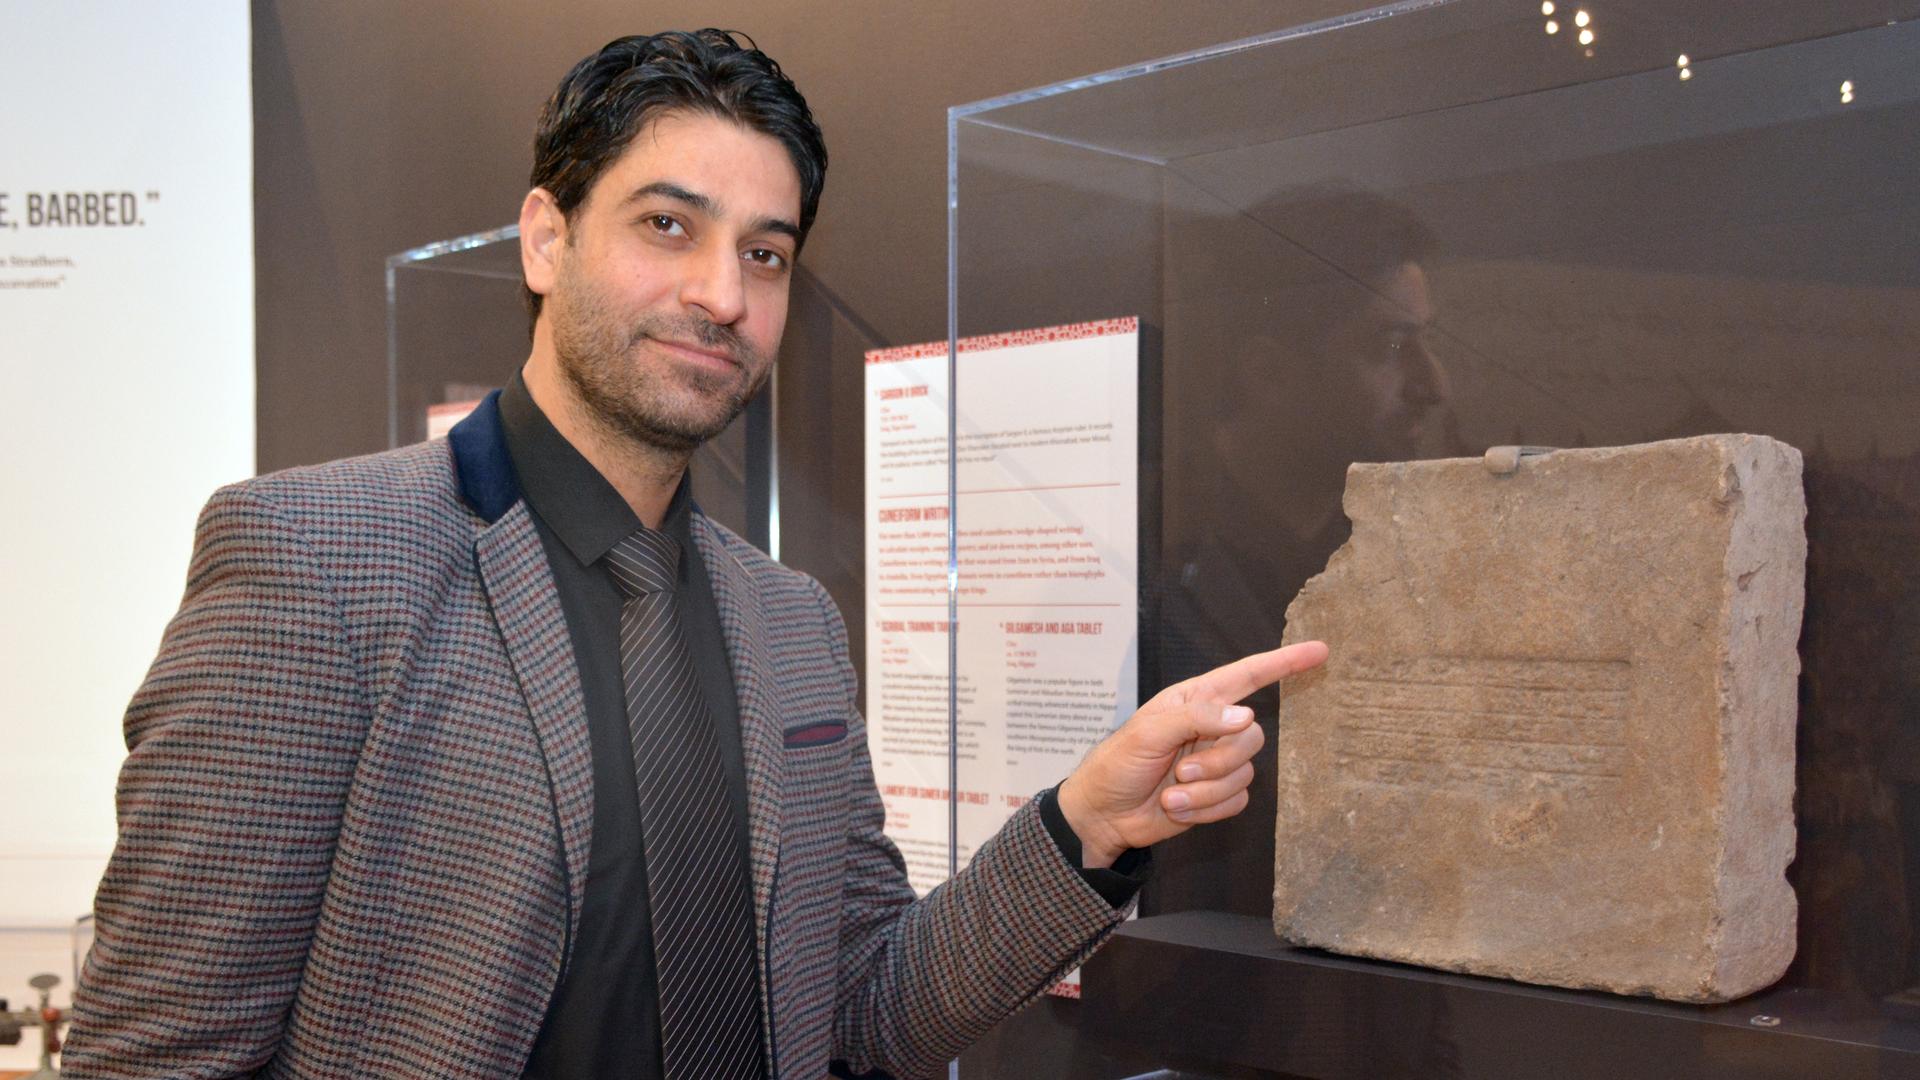 Hadi Jasim was an Iraqi translator for the US military. Now he's a "global guide" at the Penn Museum in Philadelphia.